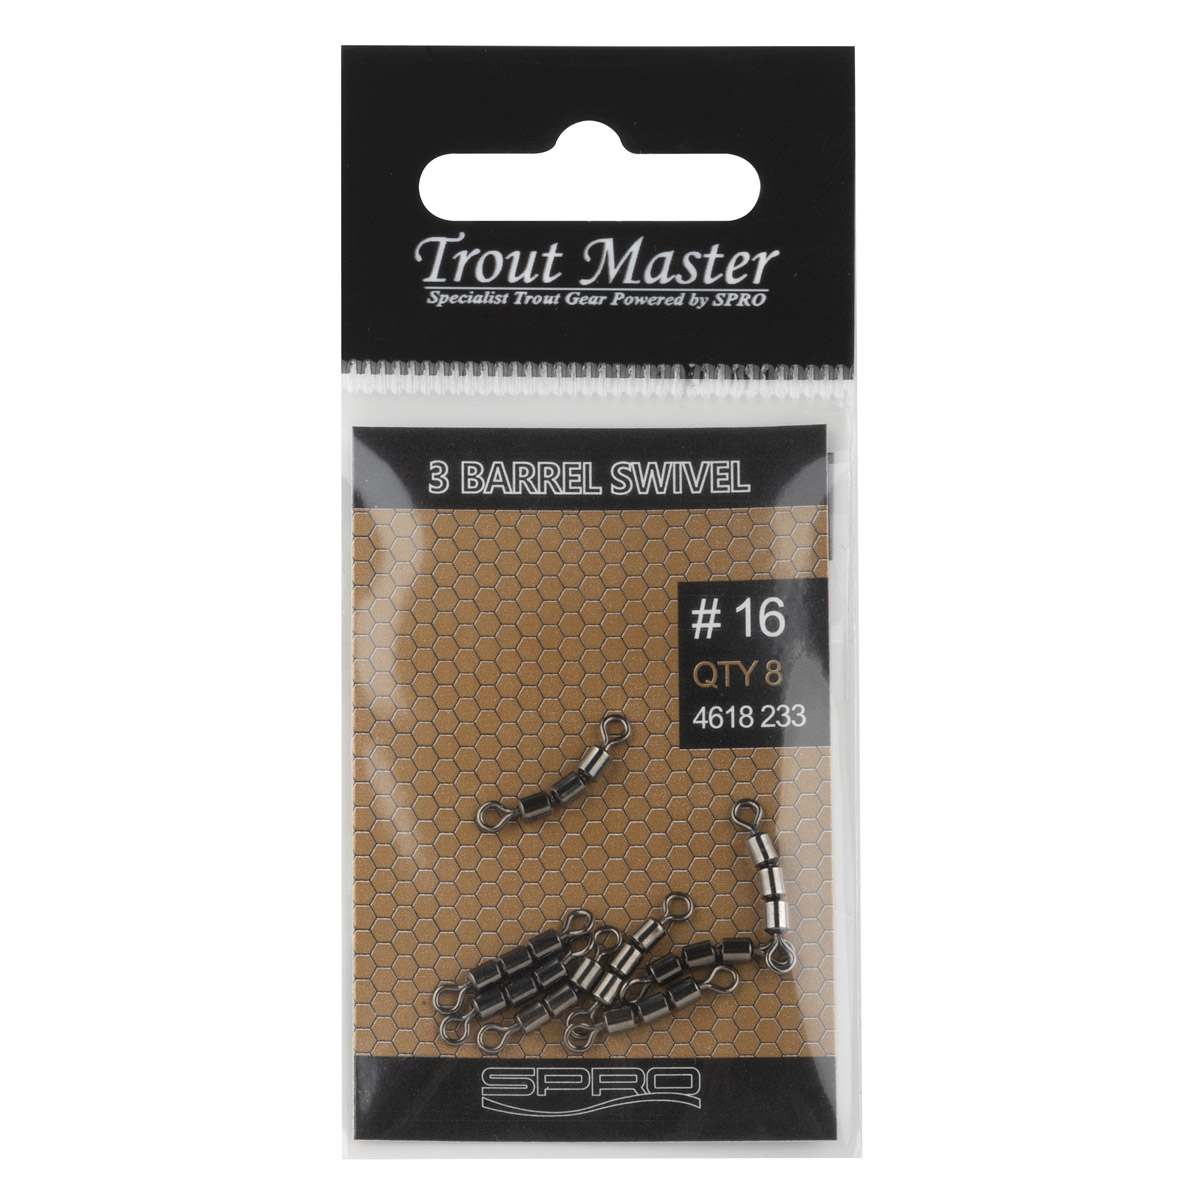 Spro Trout Master 3-Jointed Wartel